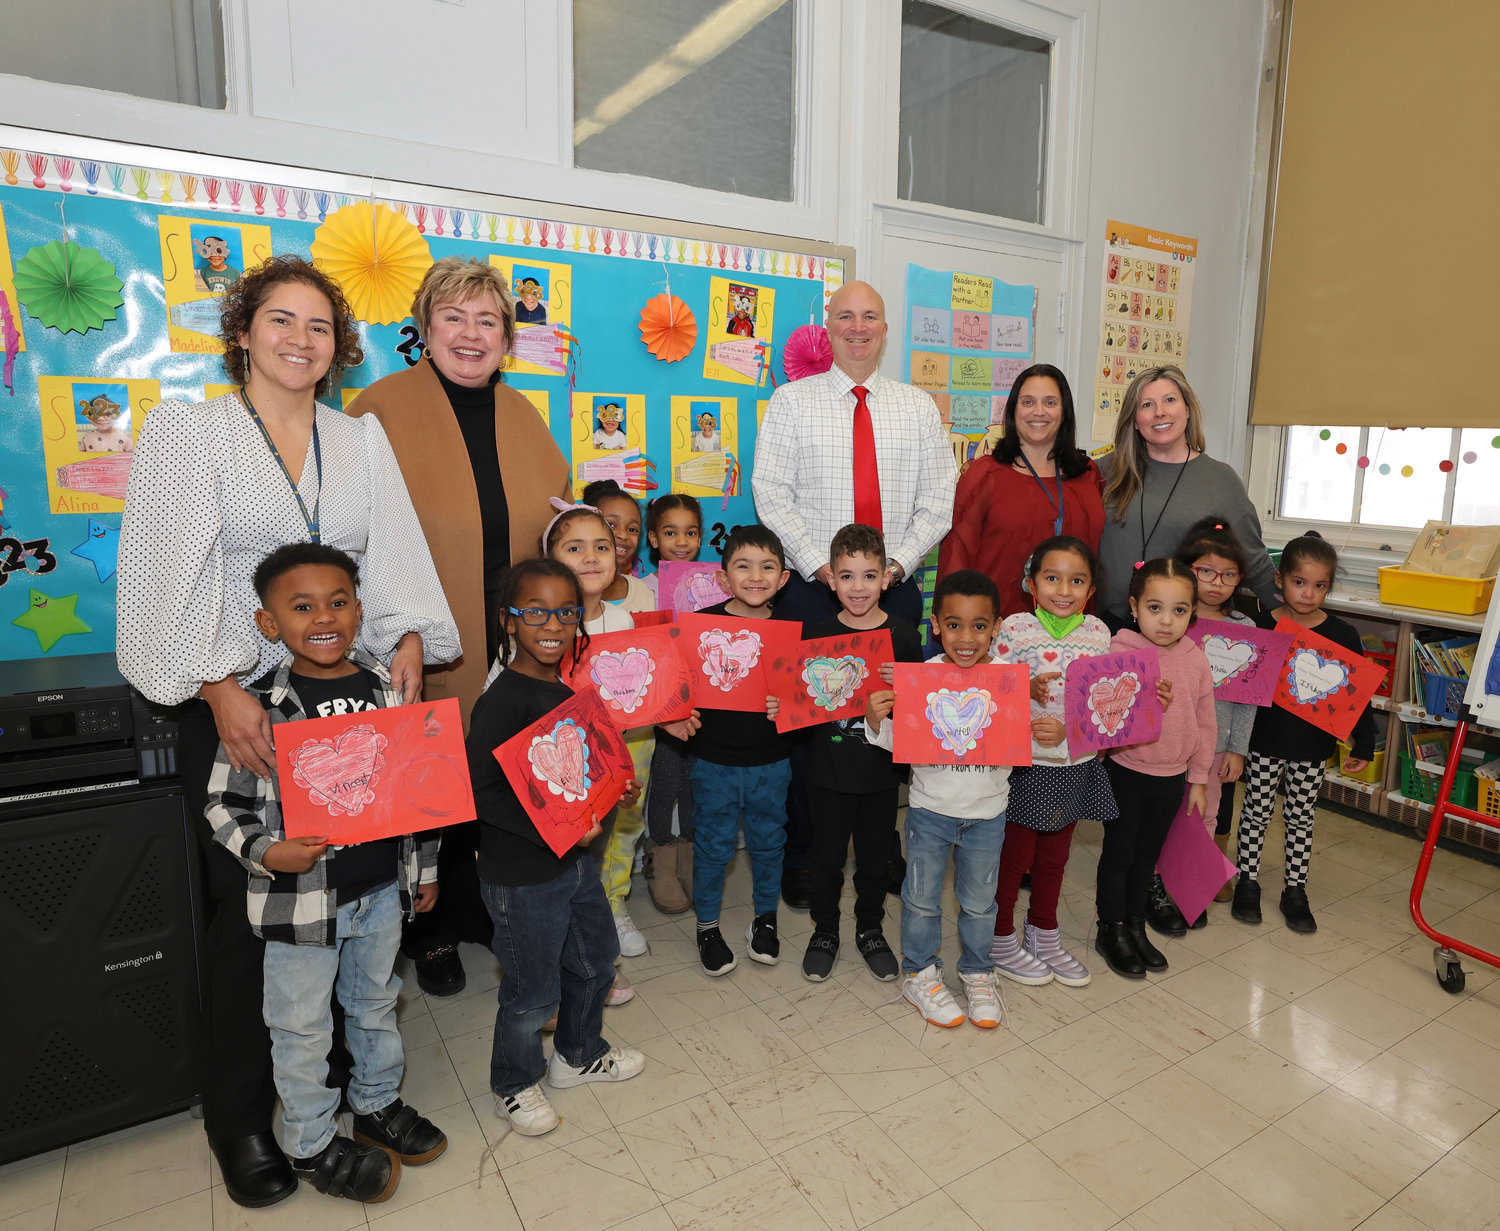 Town of Hempstead Councilman Carini and Town Clerk Kate Murray collected hundreds of cards and letters from students at Steele Elementary School and two other Baldwin elementary schools, as part of the town’s Valentine’s for Veterans program.